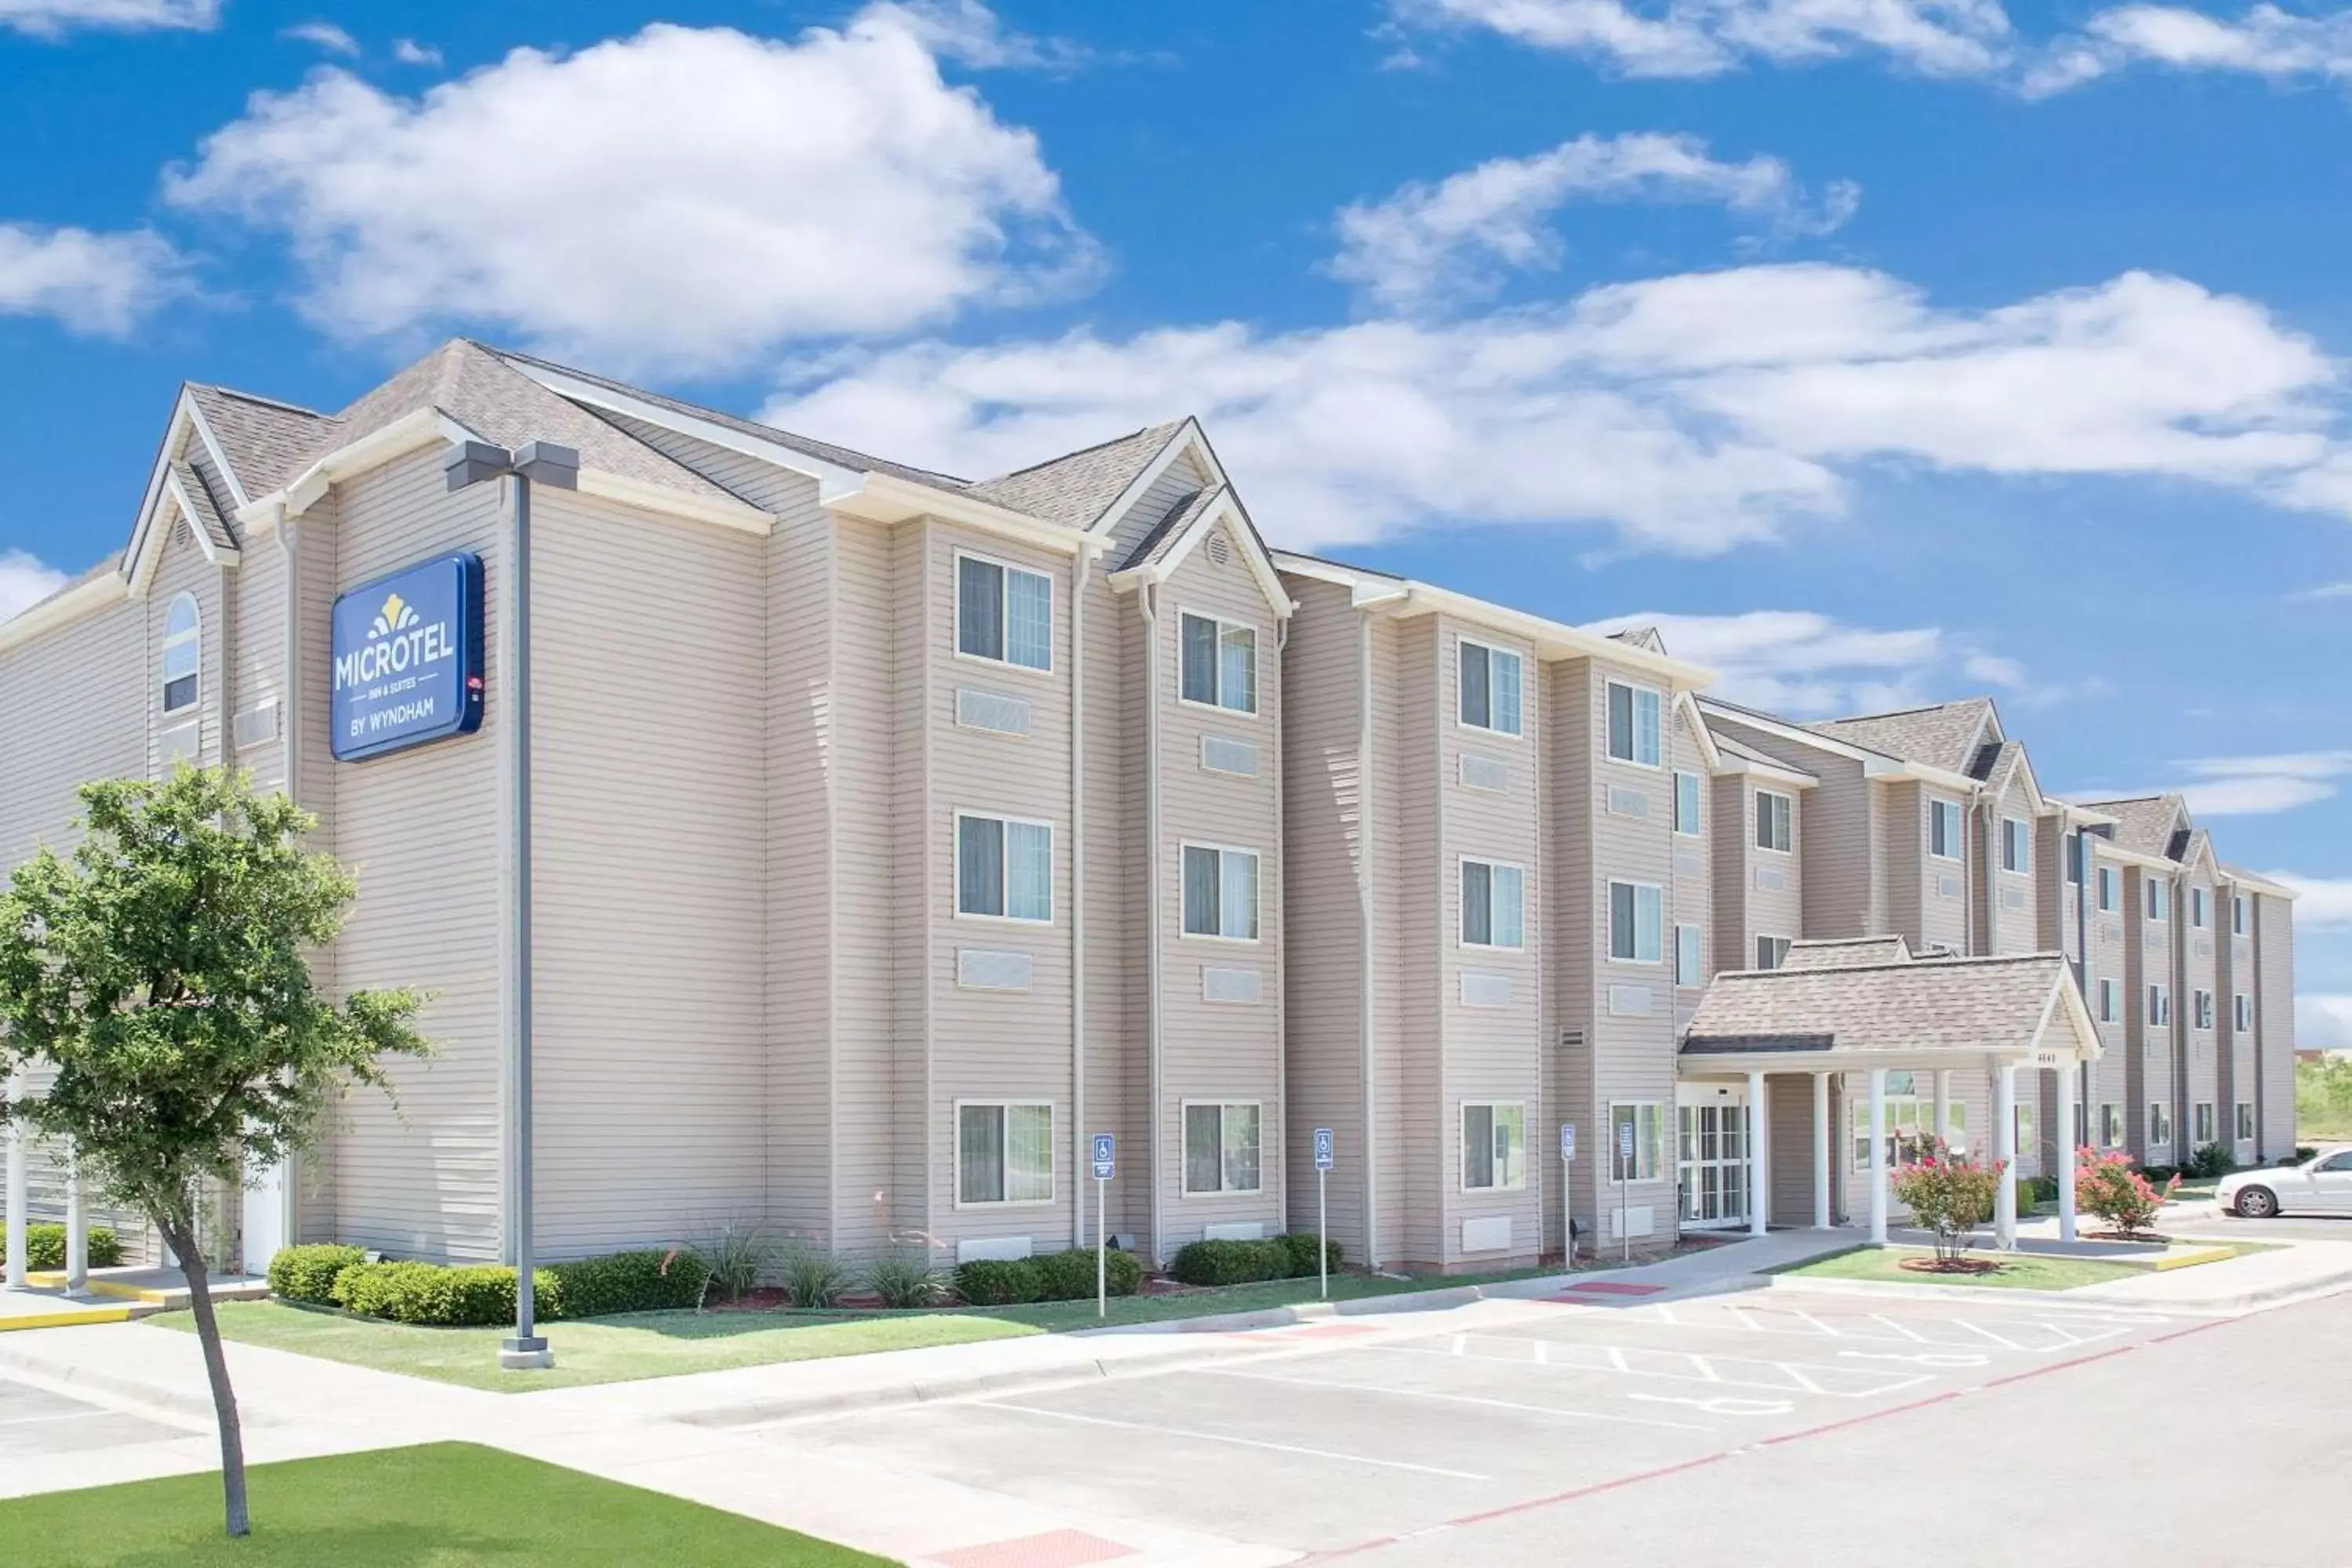 Property Building in Microtel Inn and Suites San Angelo